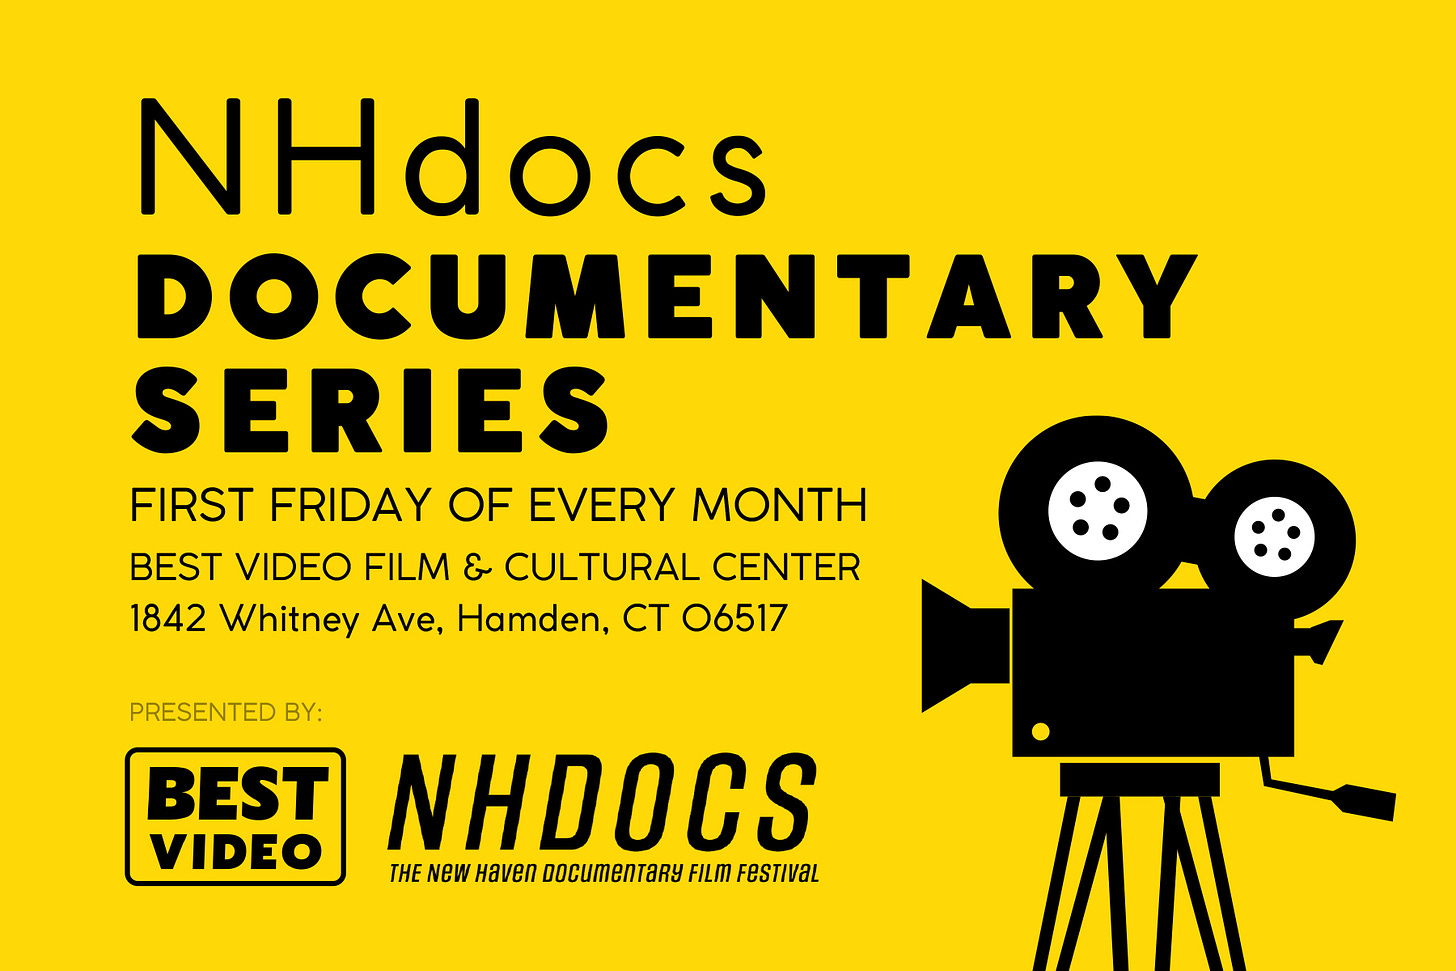 May be a cartoon of text that says 'NHdocs DOCUMENTARY SERIES FIRST FRIDAY OF EVERY MONTH BEST VIDEO FILM & CULTURAL CENTER 1842 Whitney Ave, Hamden, CT 06517 PRESENTED BY: BEST VIDEO NHDOCS THE NEW Haven DOCUMENTARY FILM FESTiVAL'